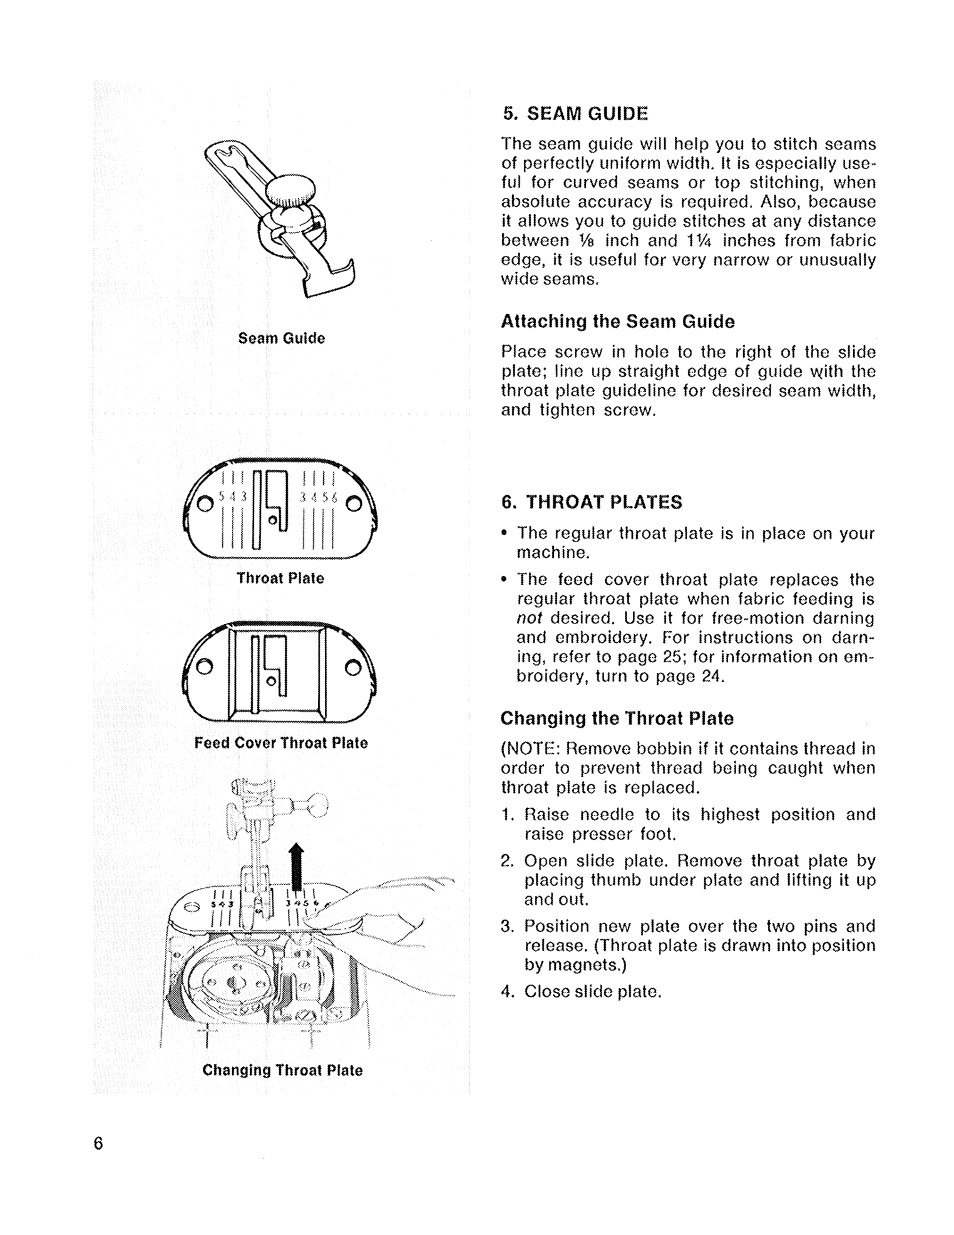 Attaching the seam guide, Throat plates, Changing the throat plate | SINGER 719 User Manual | Page 8 / 36